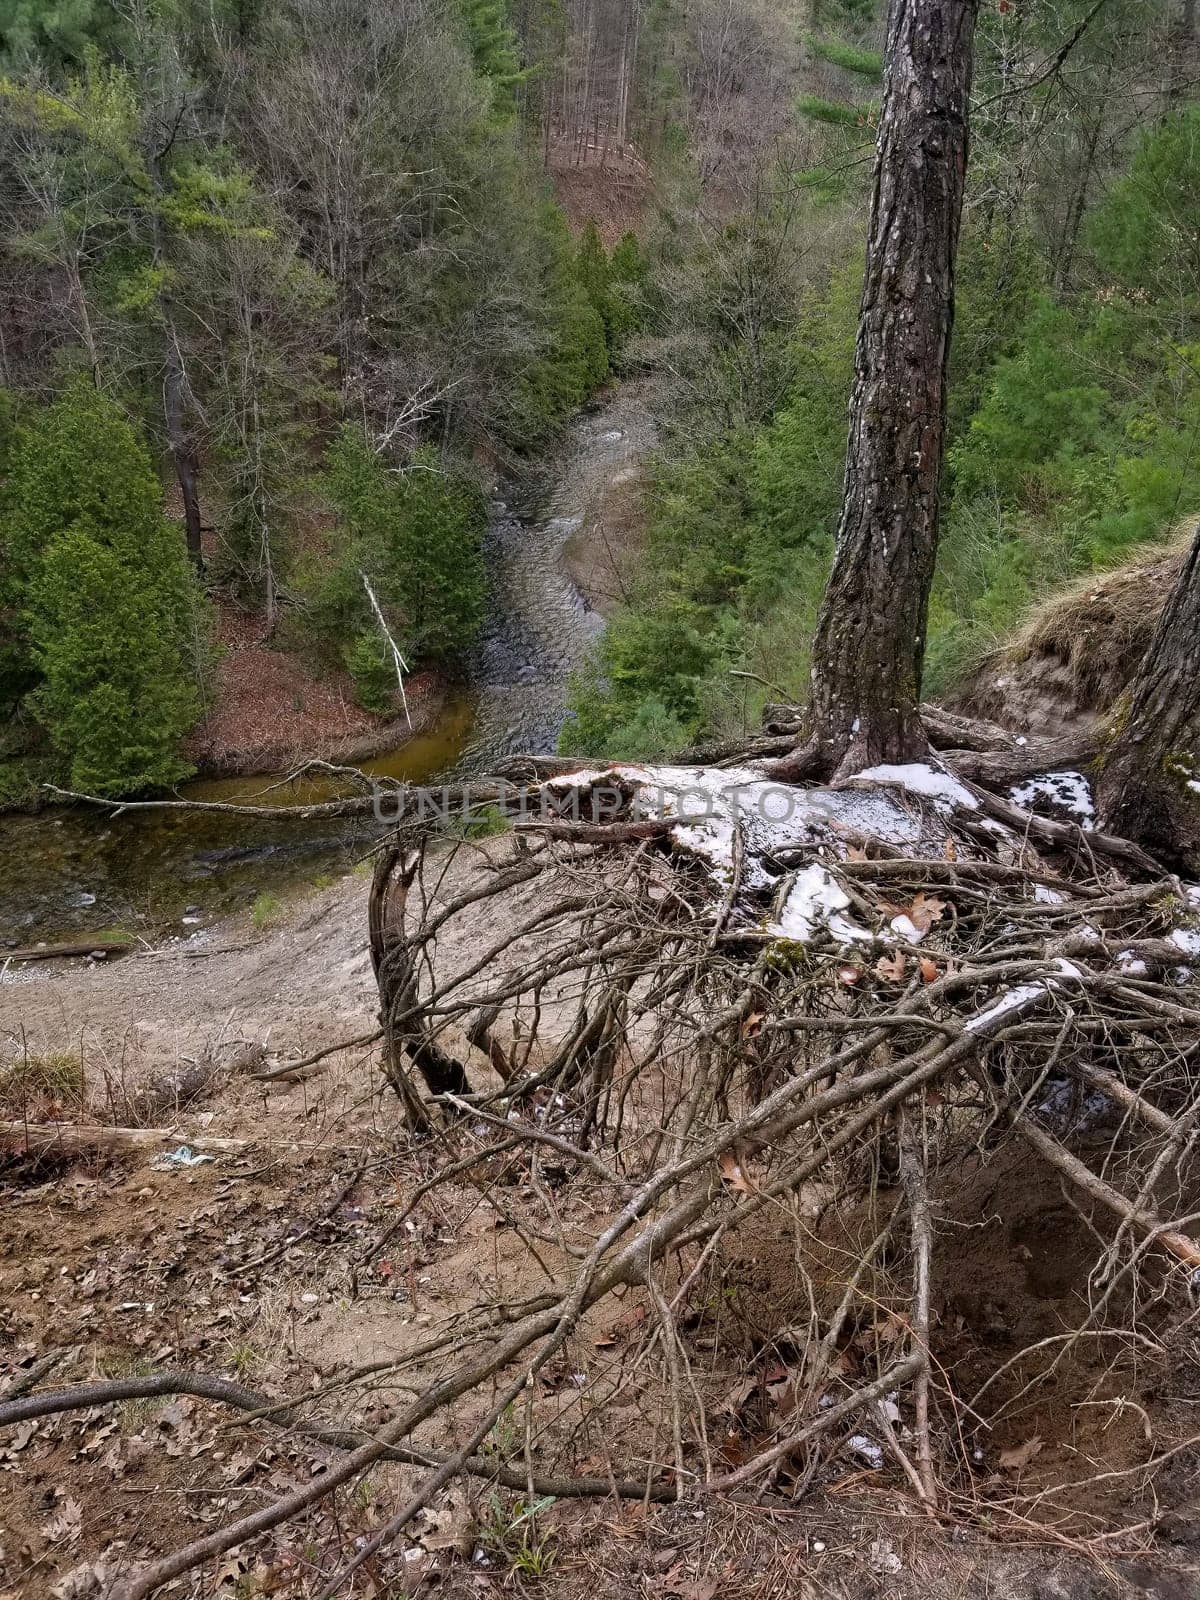 Severe Erosion along a steep ravine above a river reveal the bare root systems of pine trees in soil by markvandam